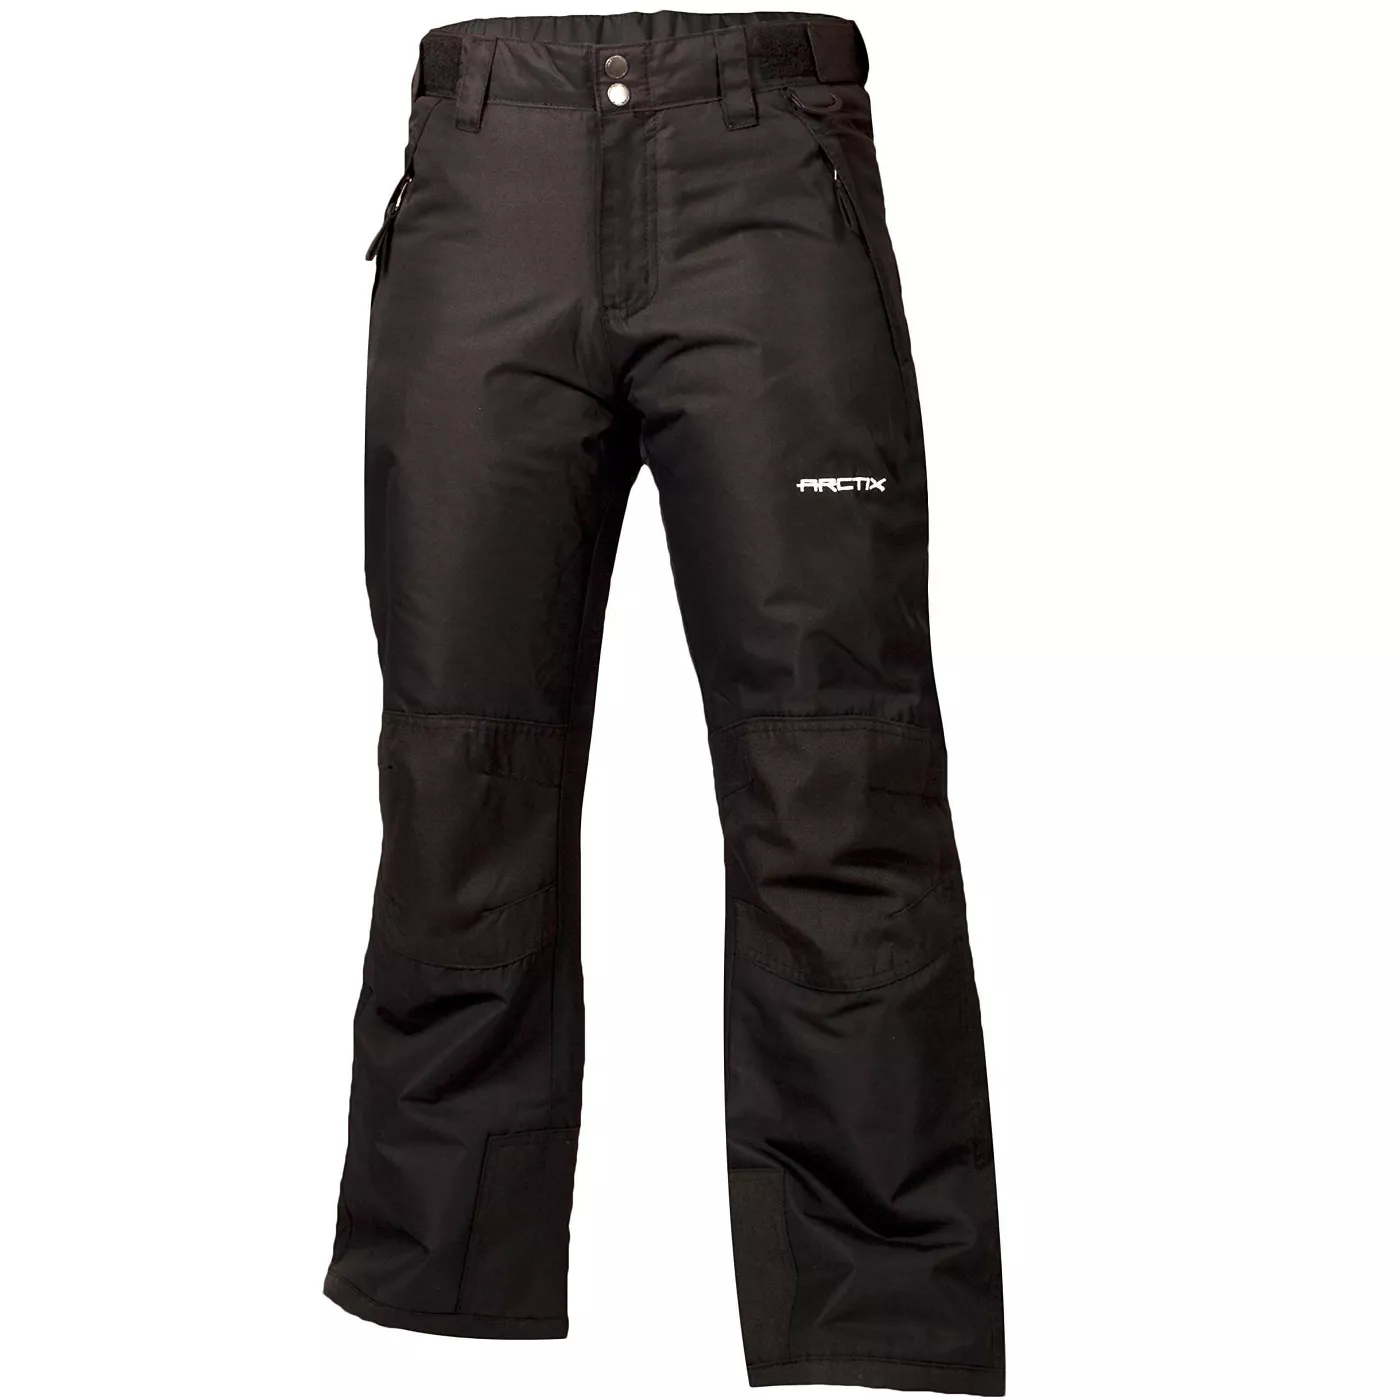 target.com | Snow Pants with Reinforced Knees and Seat